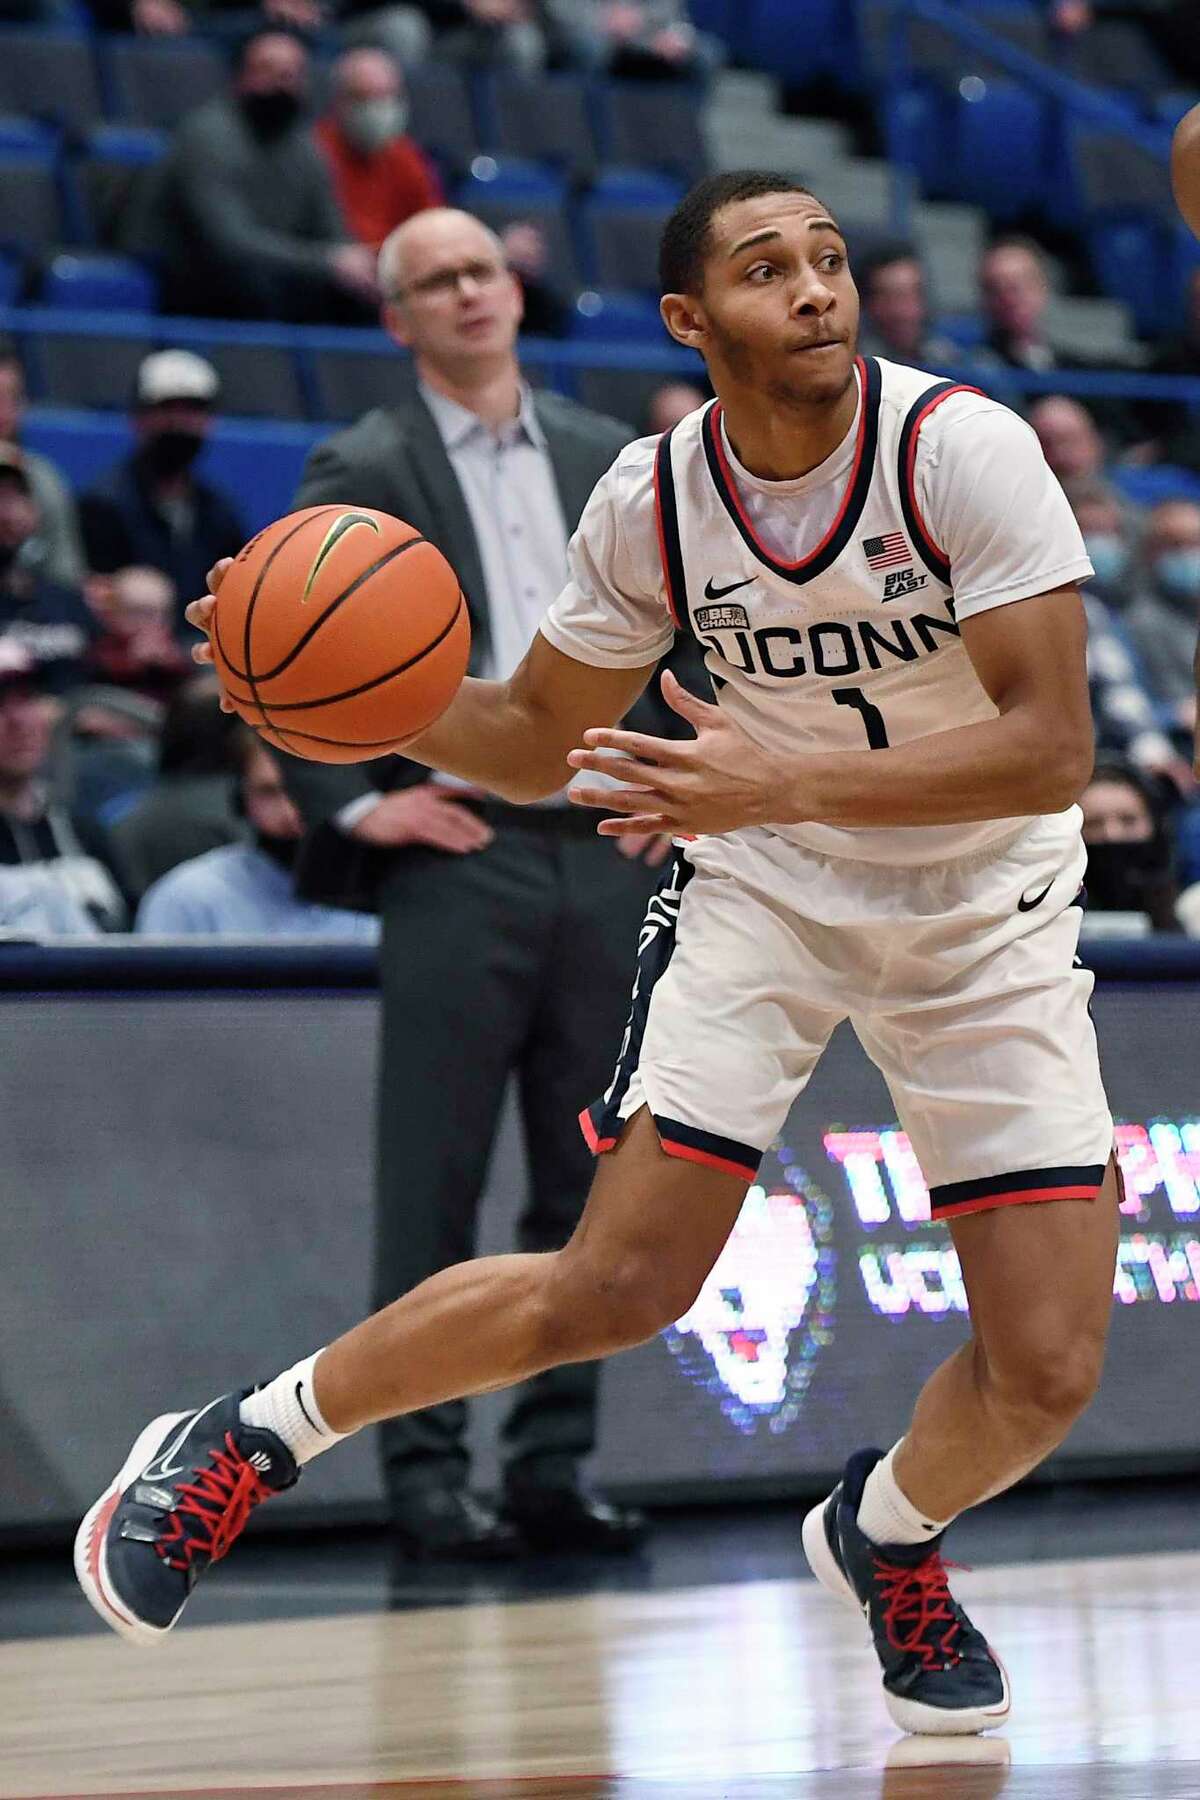 Connecticut's Rahsool Diggins in the second half of an NCAA college basketball game, Tuesday, Jan. 18, 2022, in Hartford, Conn. (AP Photo/Jessica Hill)